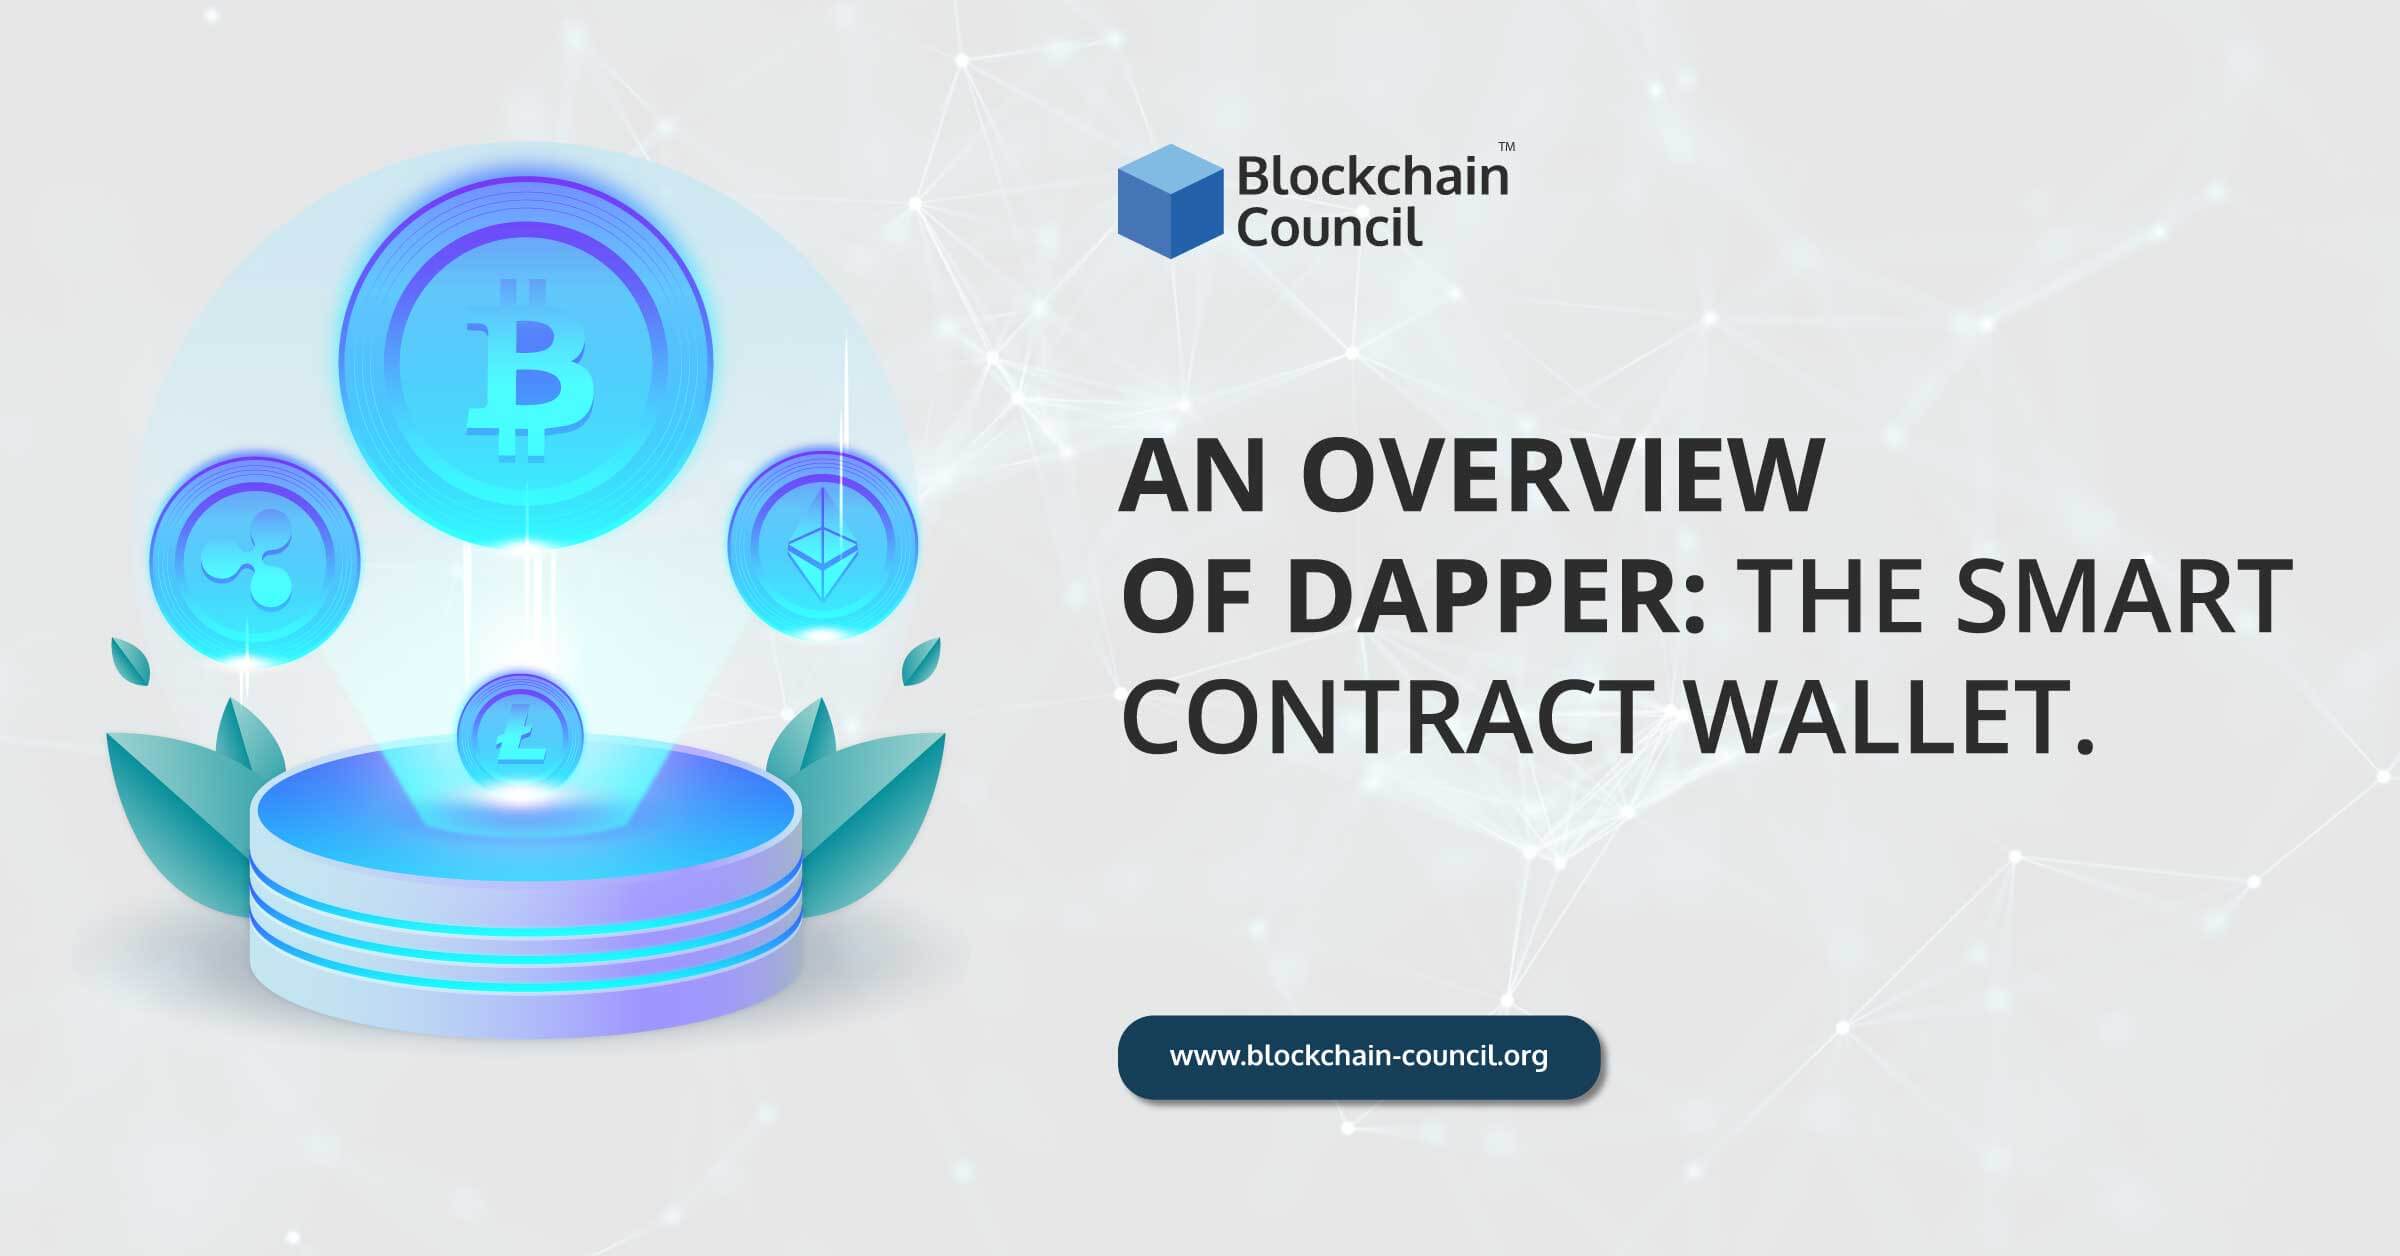 An Overview of Dapper: The Smart Contract Wallet